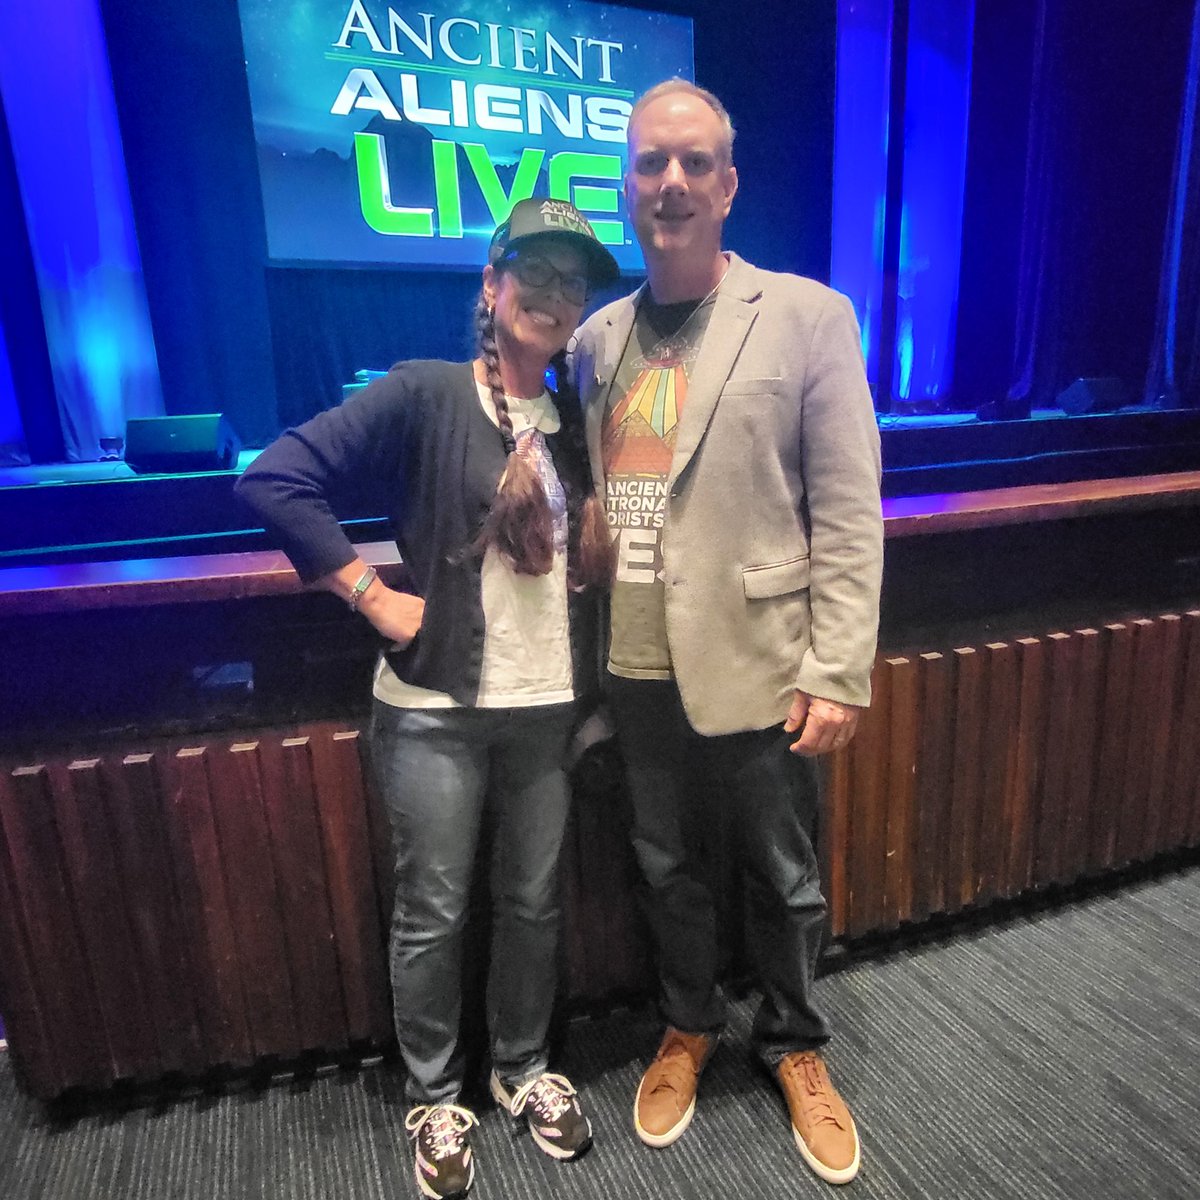 My wife @ChickenWhisp22 & I had a great time in Charlotte with the guys from #AncientAliensLive. 

TY for a great show, hospitality & kindness during the VIP photo op. We are looking forward to following  your adventures.

@Tsoukalos @davidhchildress @travisstaylor1 @nickpopemod